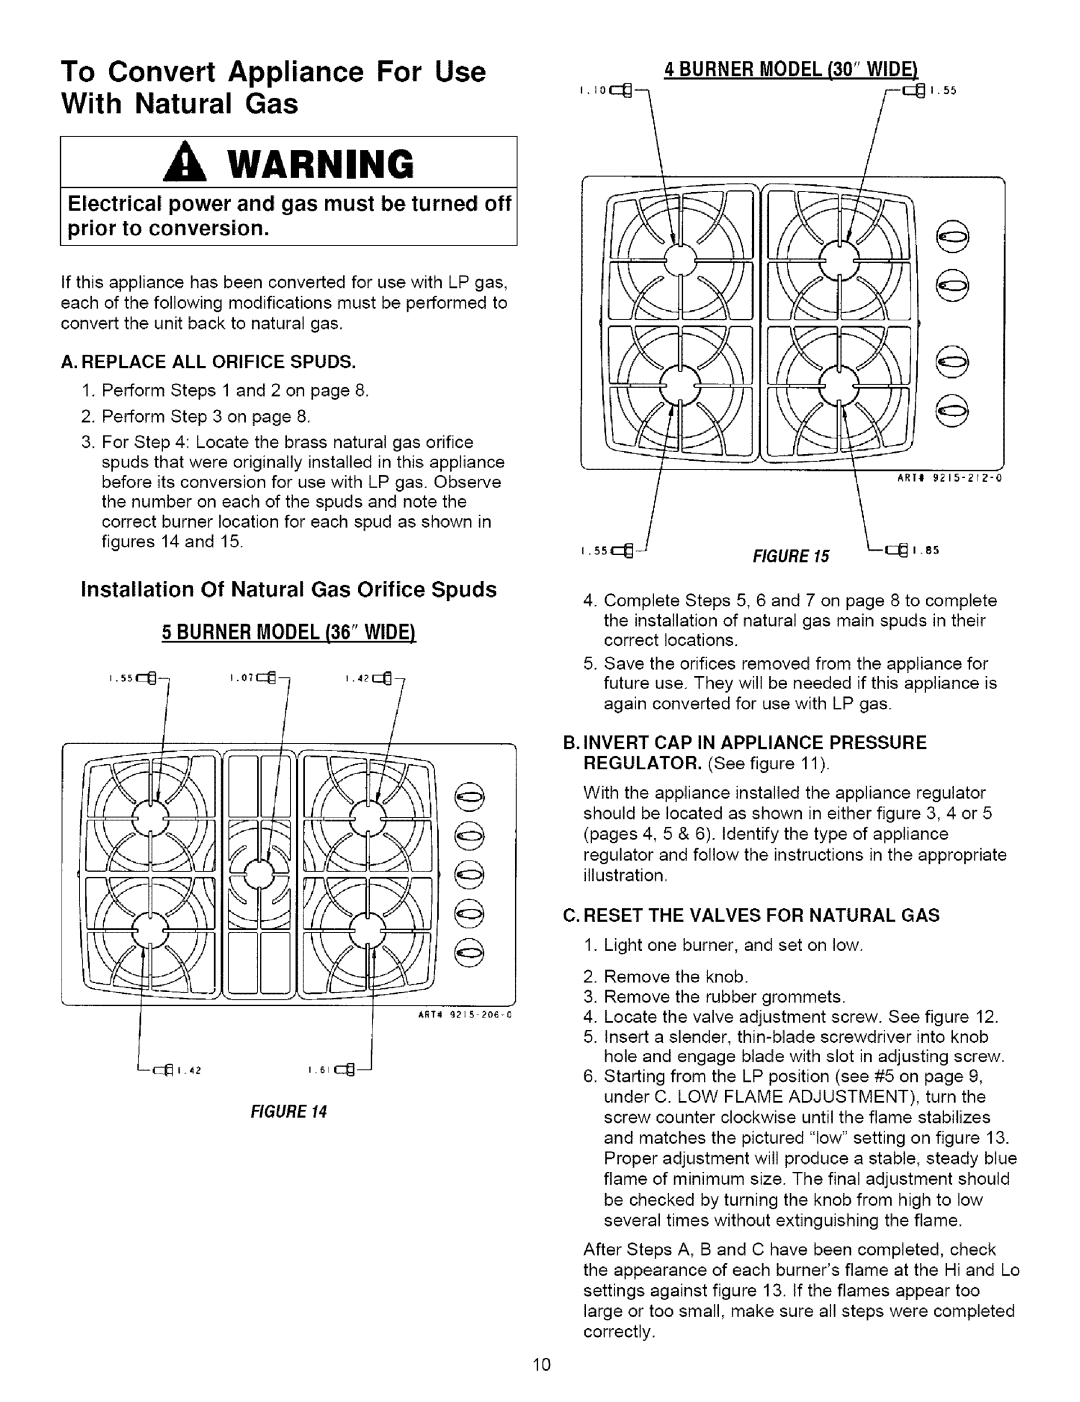 Maytag MGC6430, MGC6536 dimensions To Convert Appliance For Use With Natural Gas, prior to conversion, BURNER MODEL 36 WIDE 